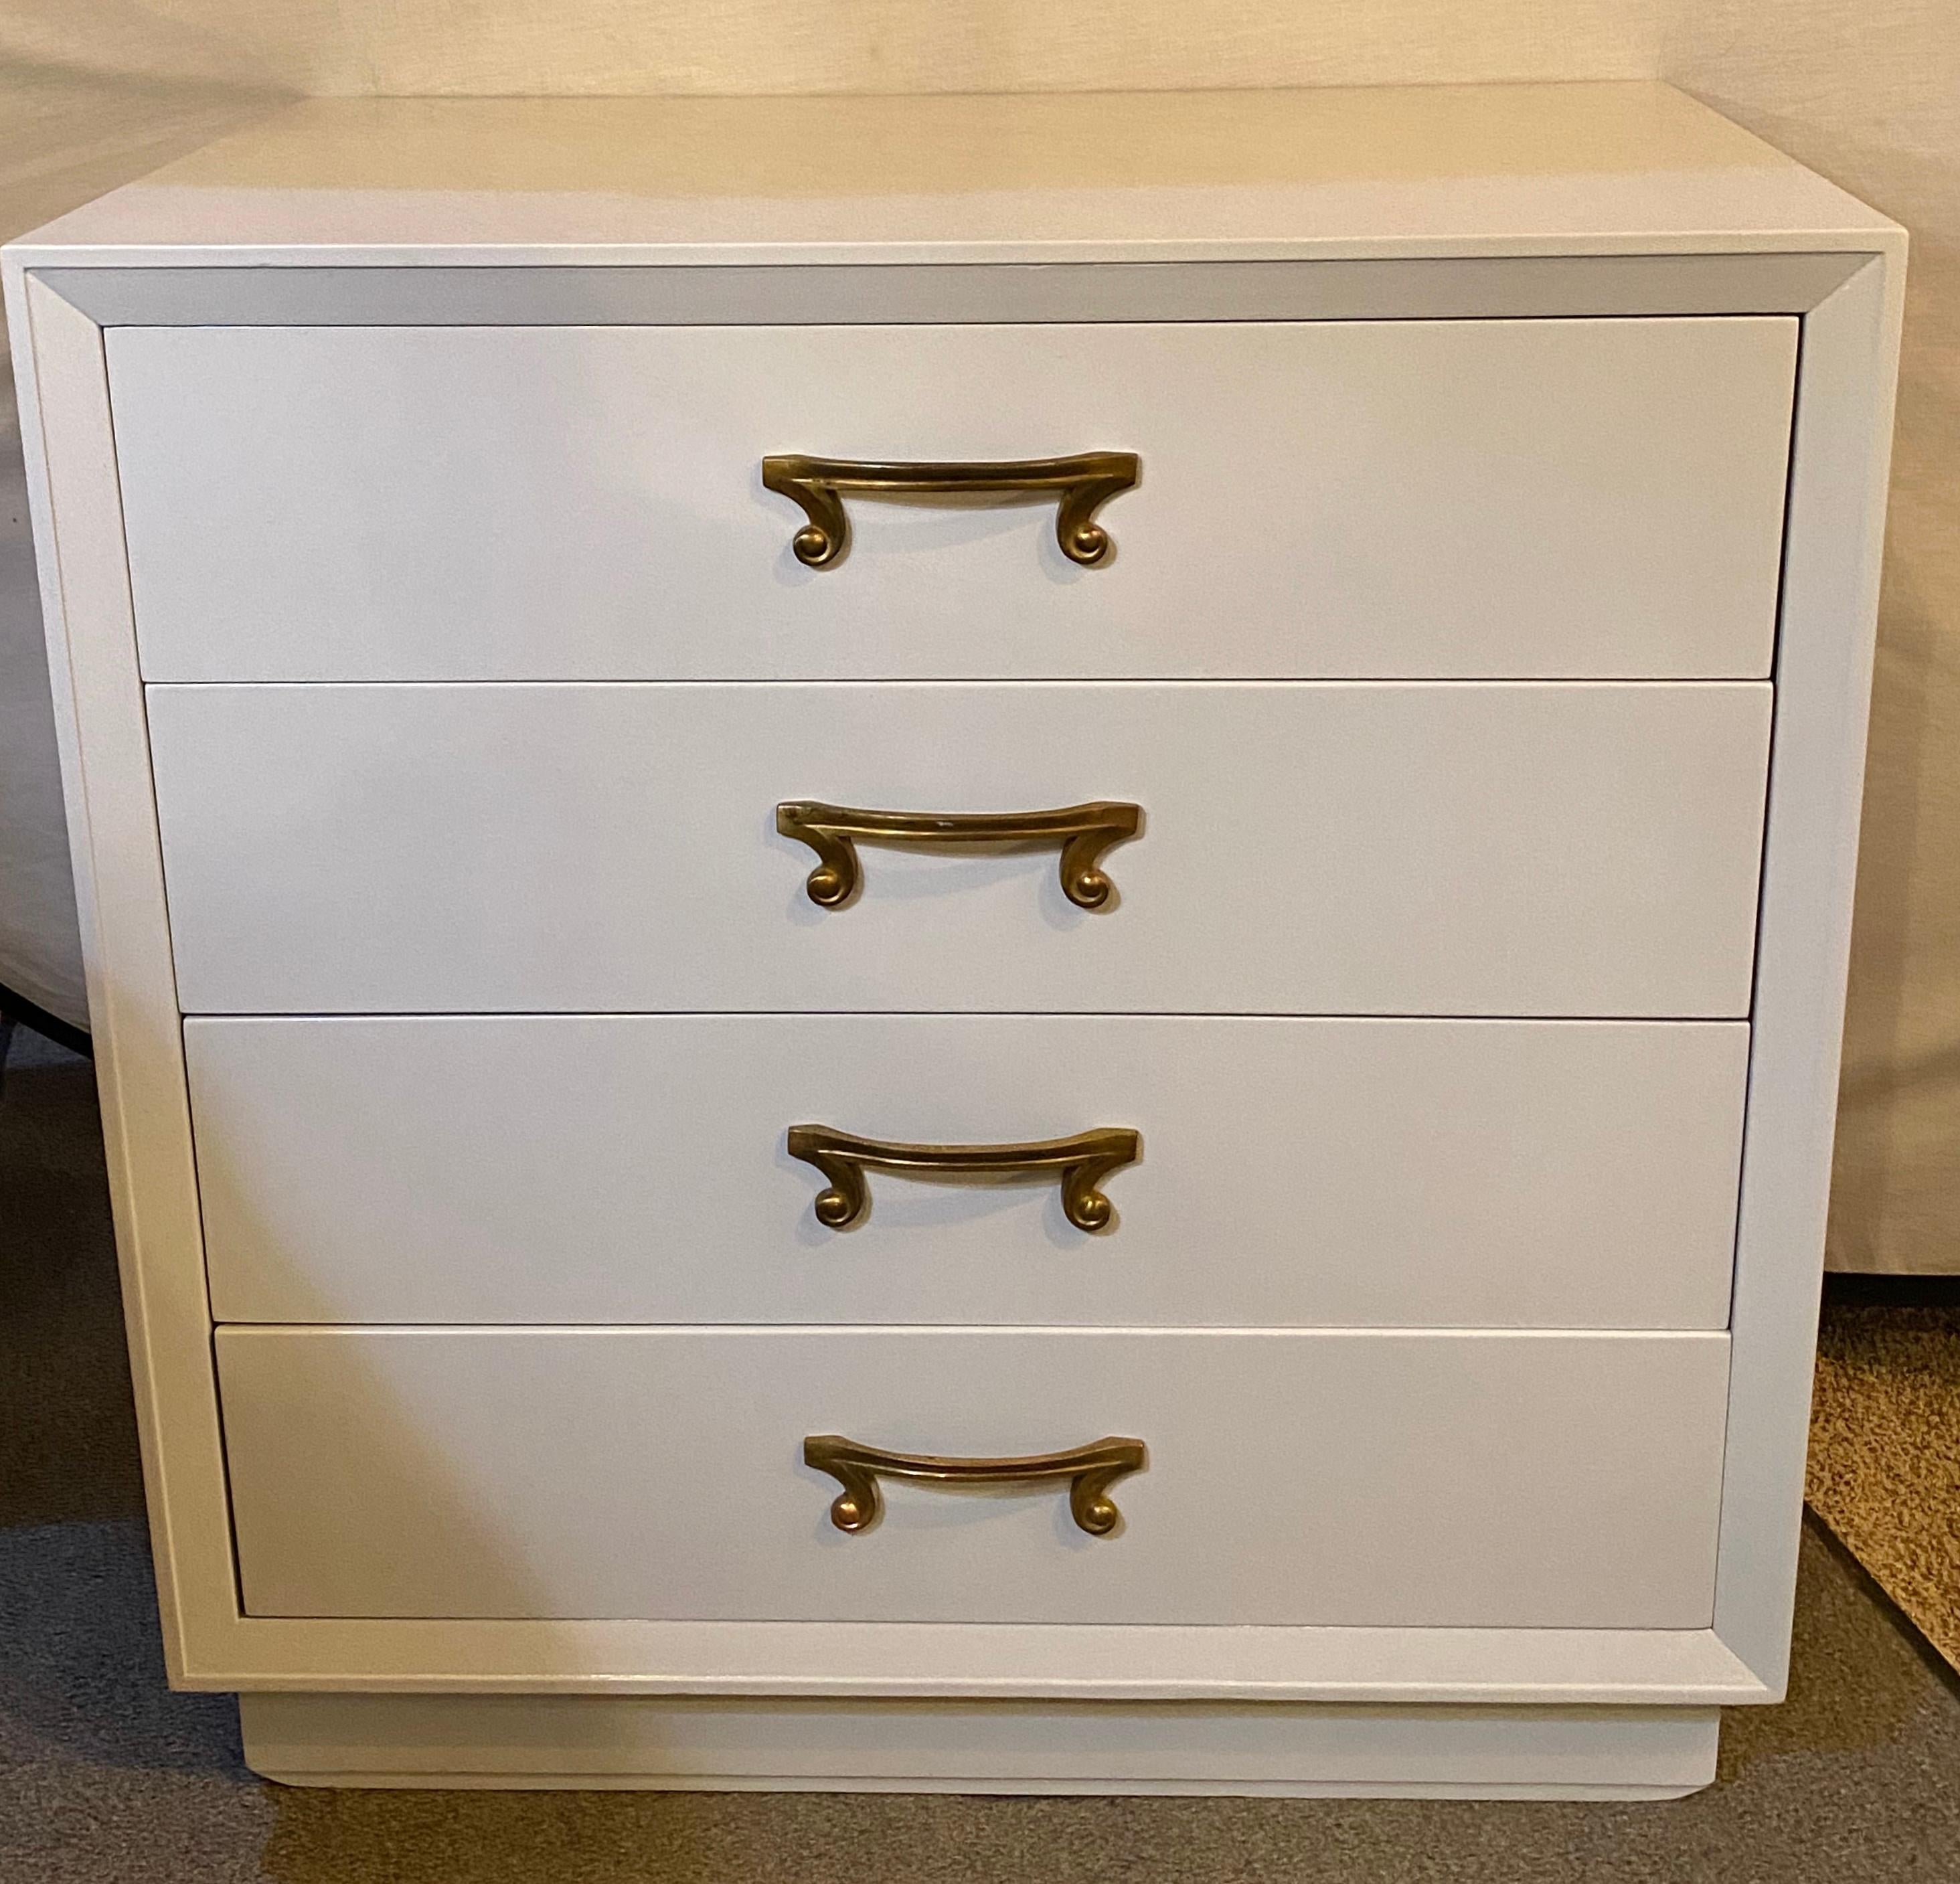 Parzinger style Hollywood Regency four-drawer chest dresser commode dove grey lacquer. This finely designed chest has recently been fully redone in a dove gray lacquered finish. The Tommi Parzinger style commode or bedside stand has gilt metal